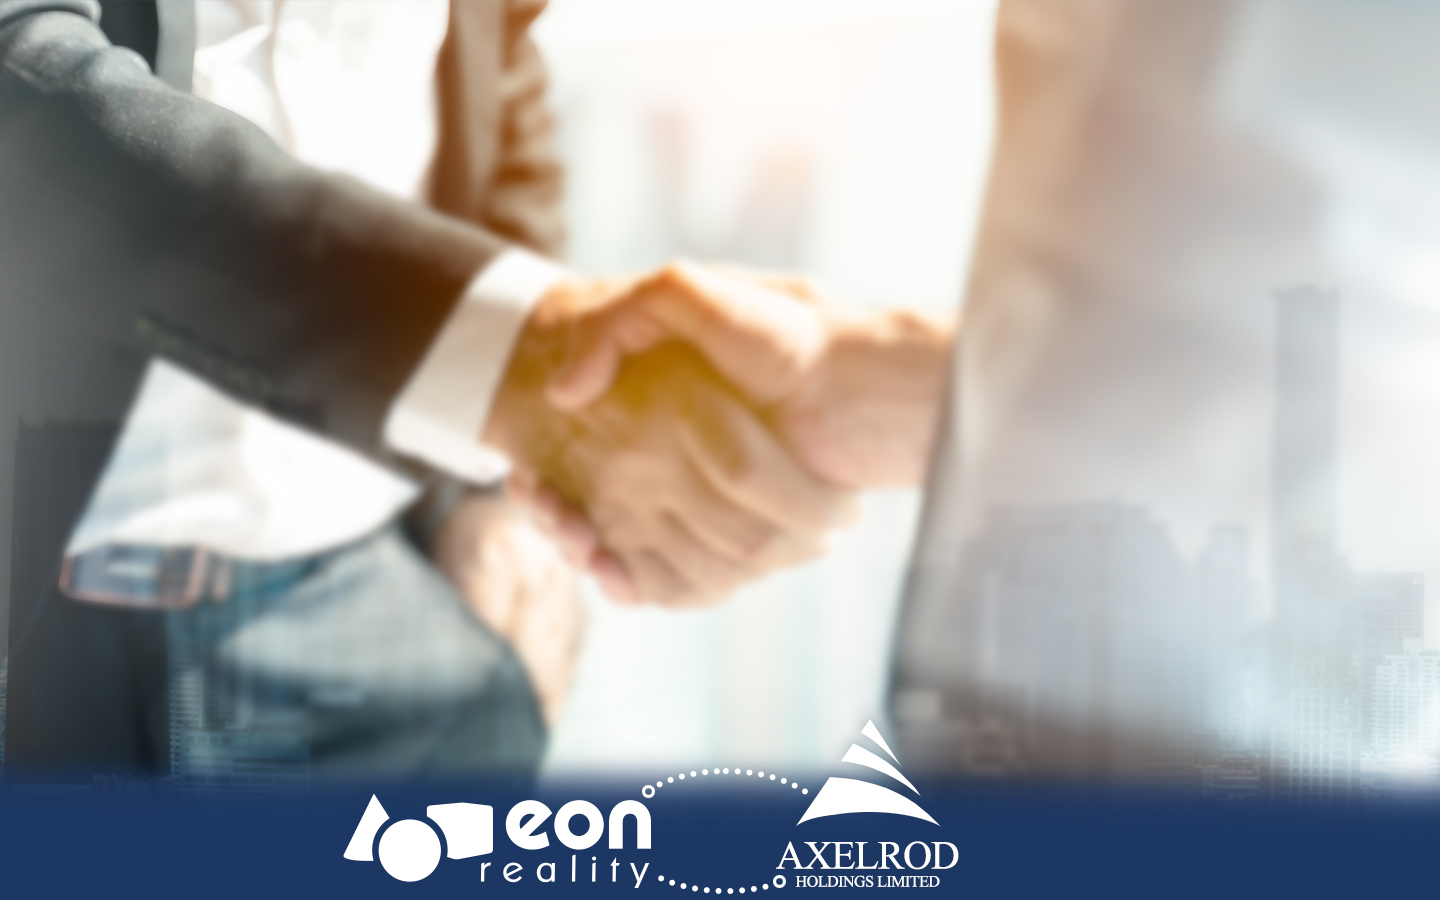 EON Reality Inc. Enters Into Partnership With Axelrod Holdings Limited